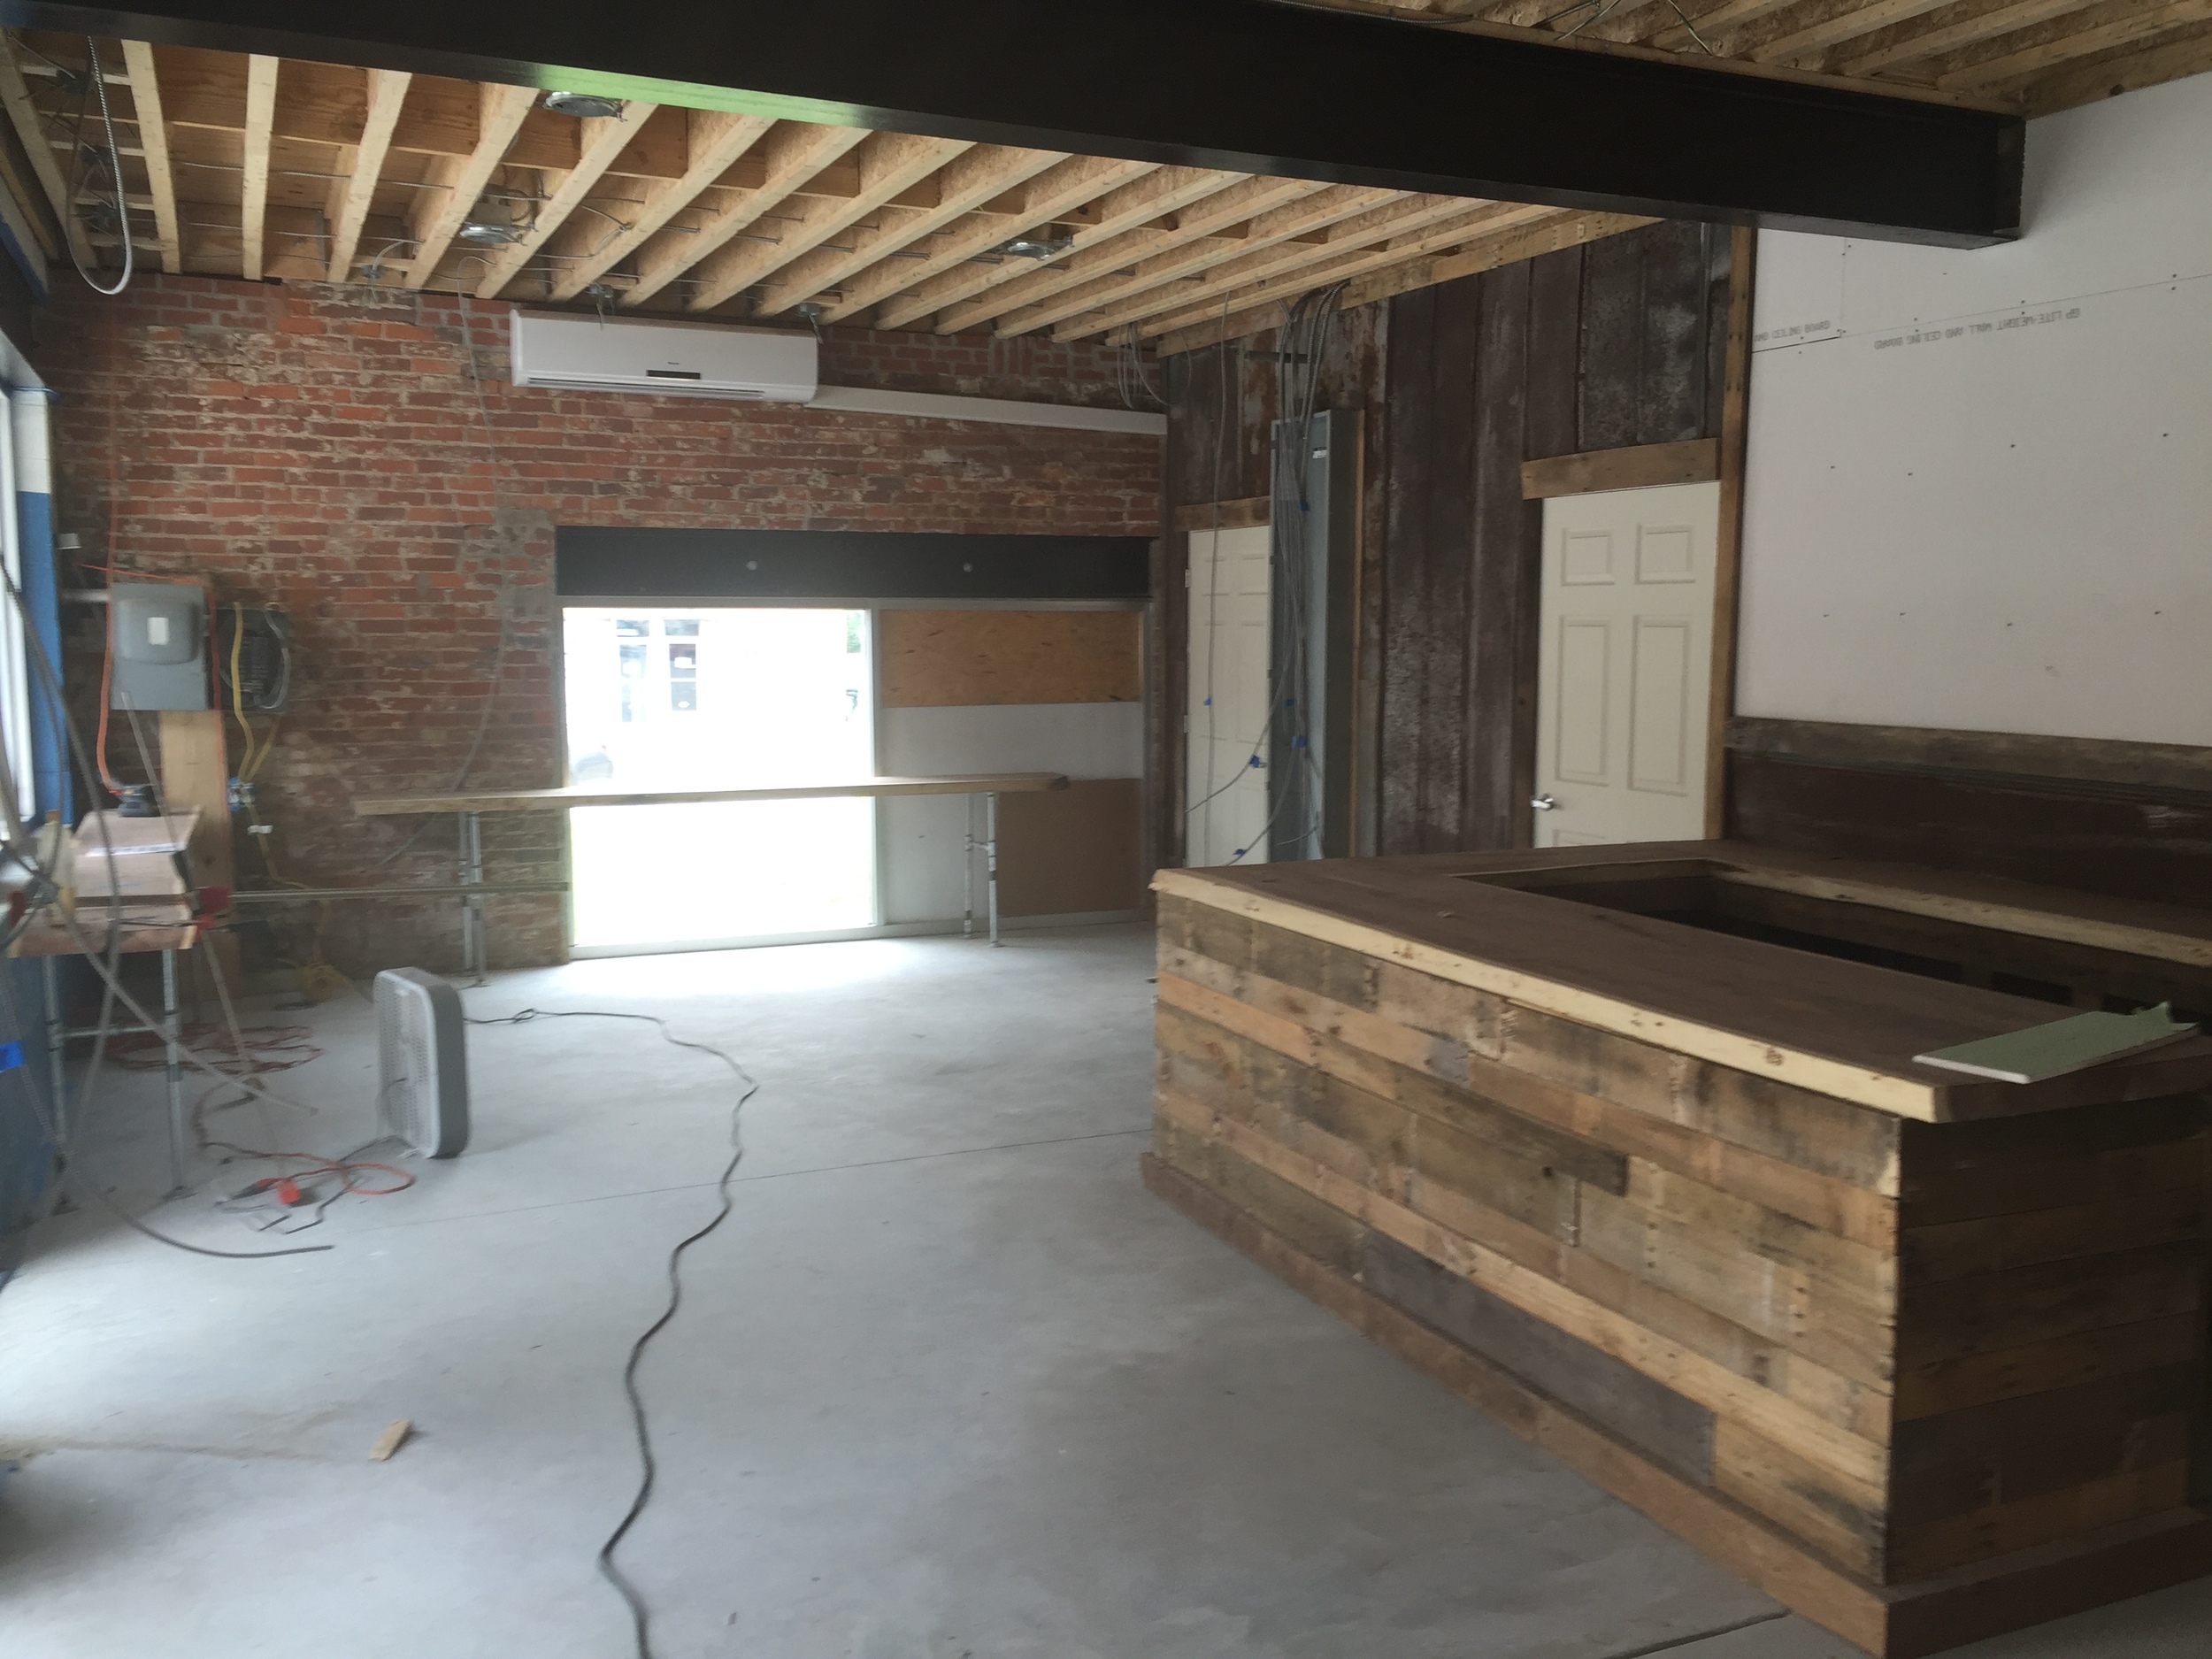  1/2 of our picture window is in place, overlooking Main St., with a long walnut bar in front. 